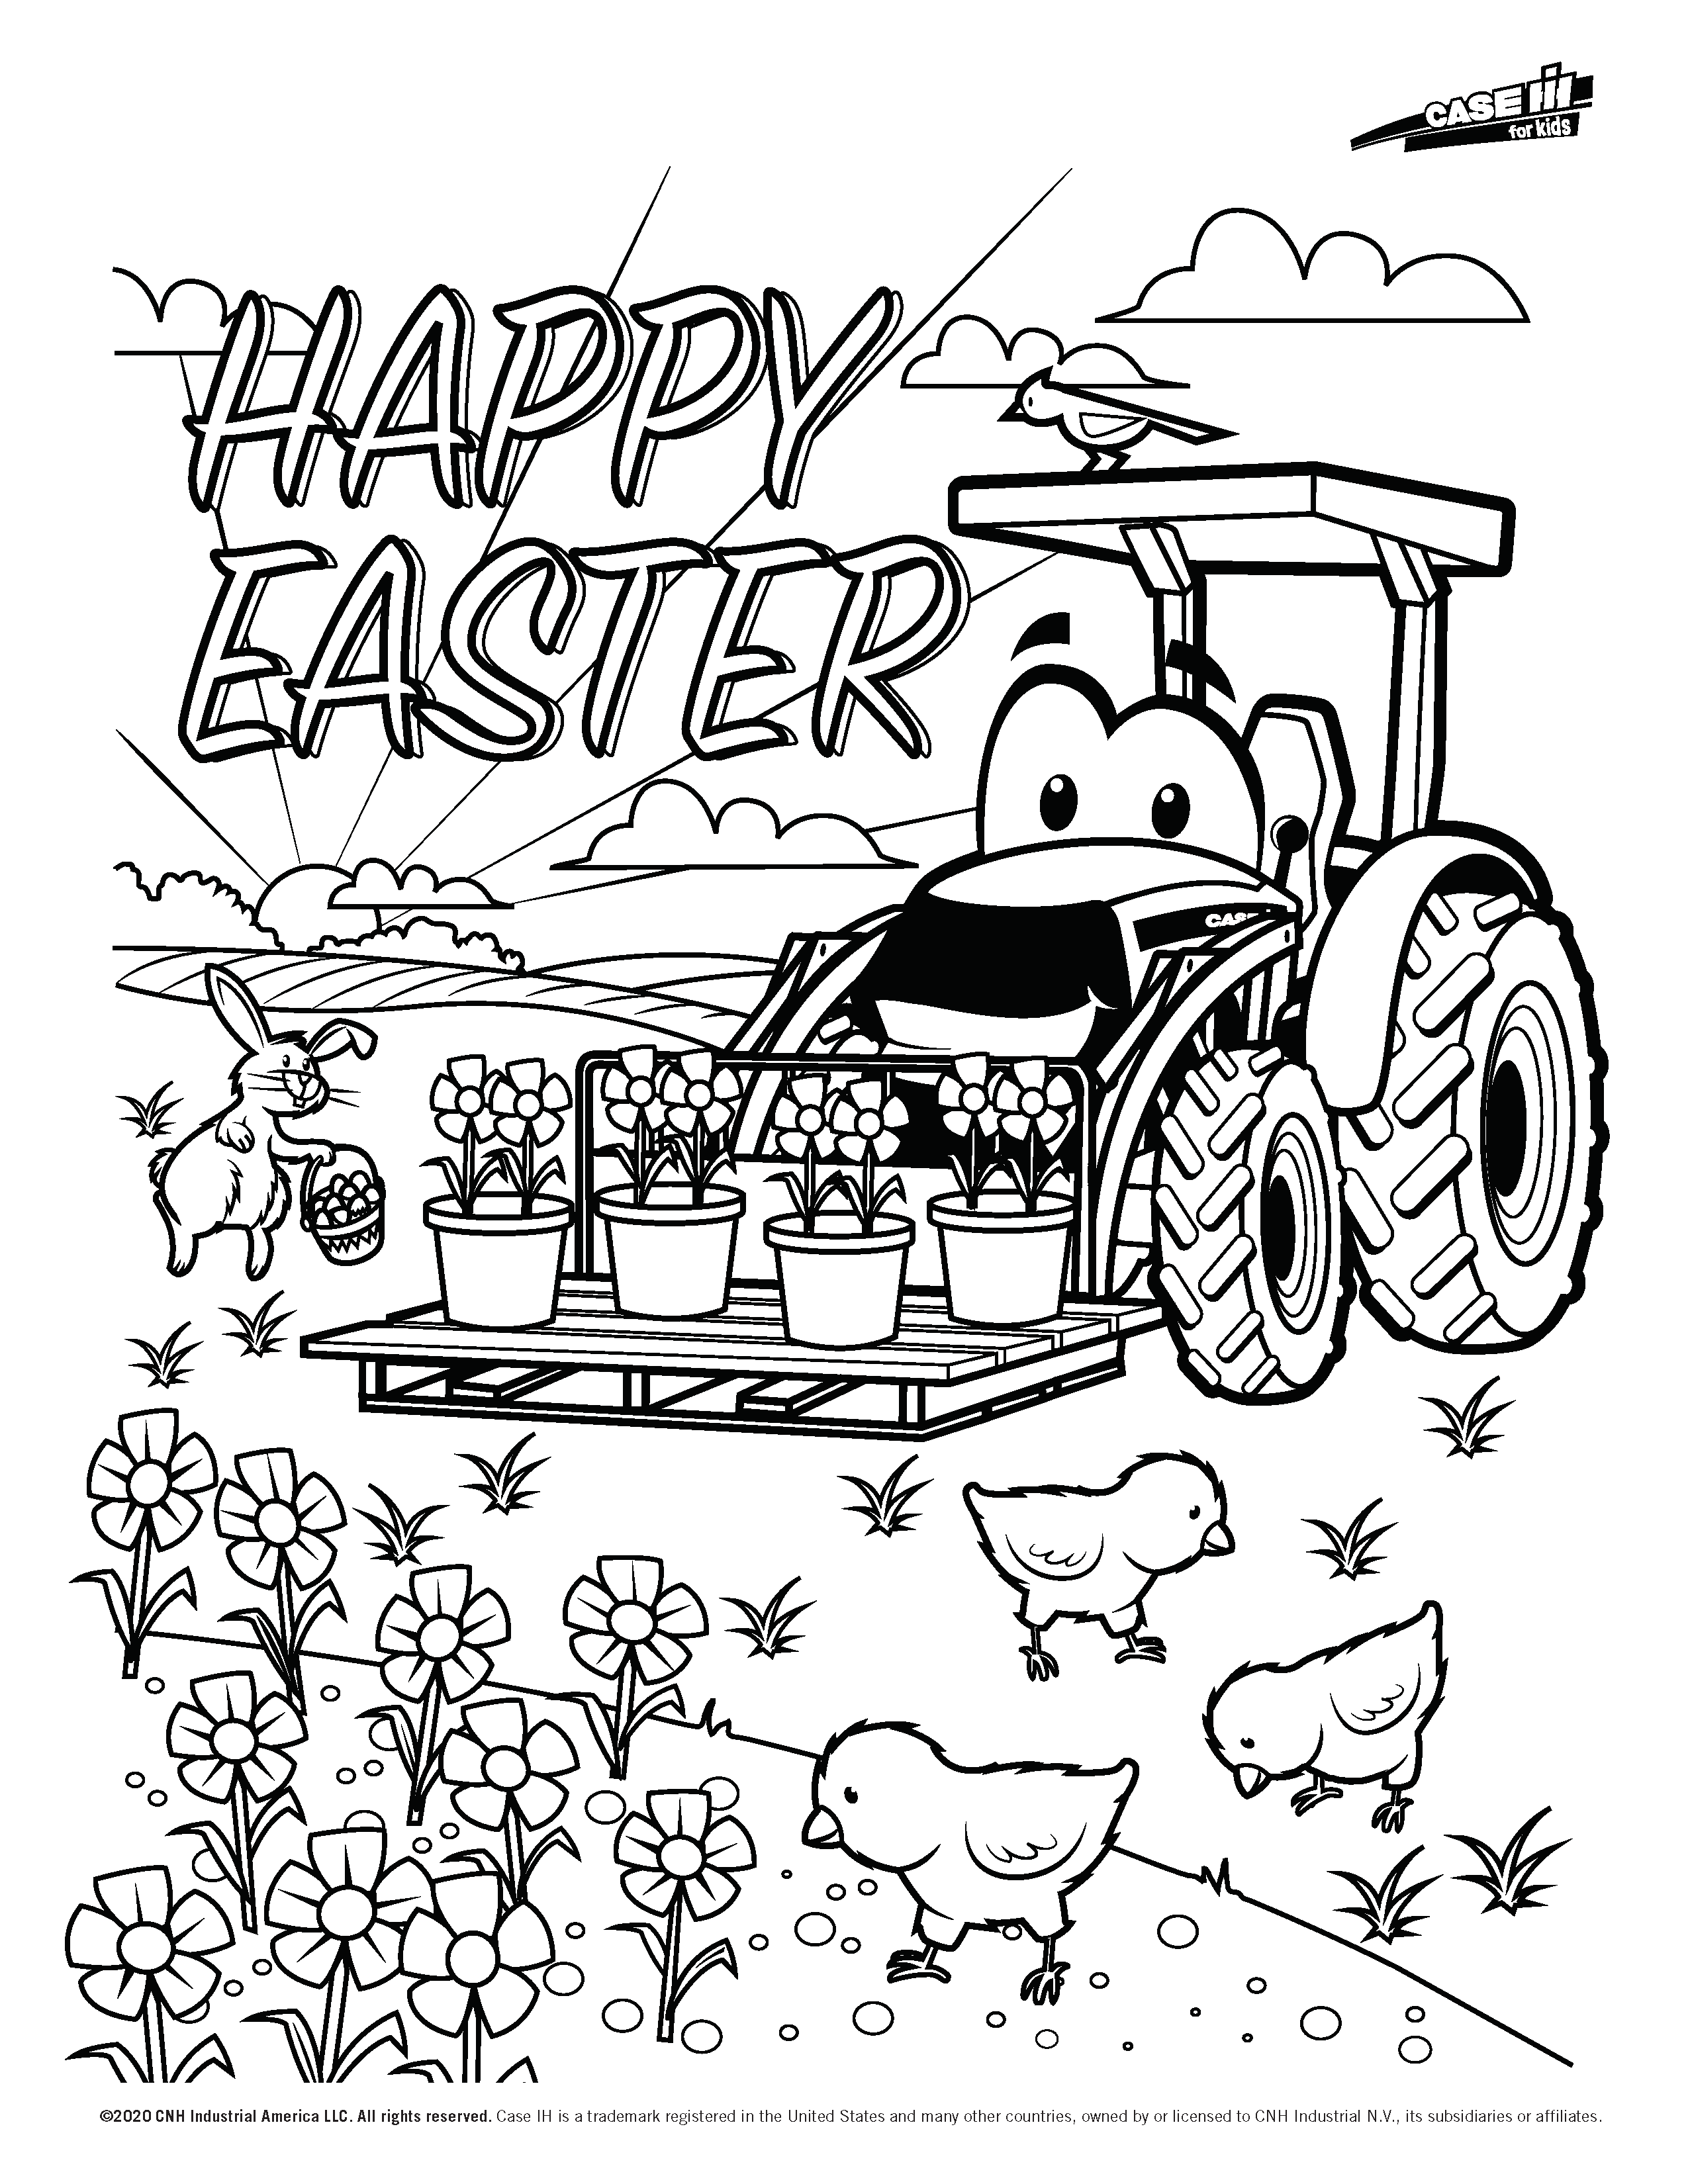 Casey and Friends_Easter_02.png